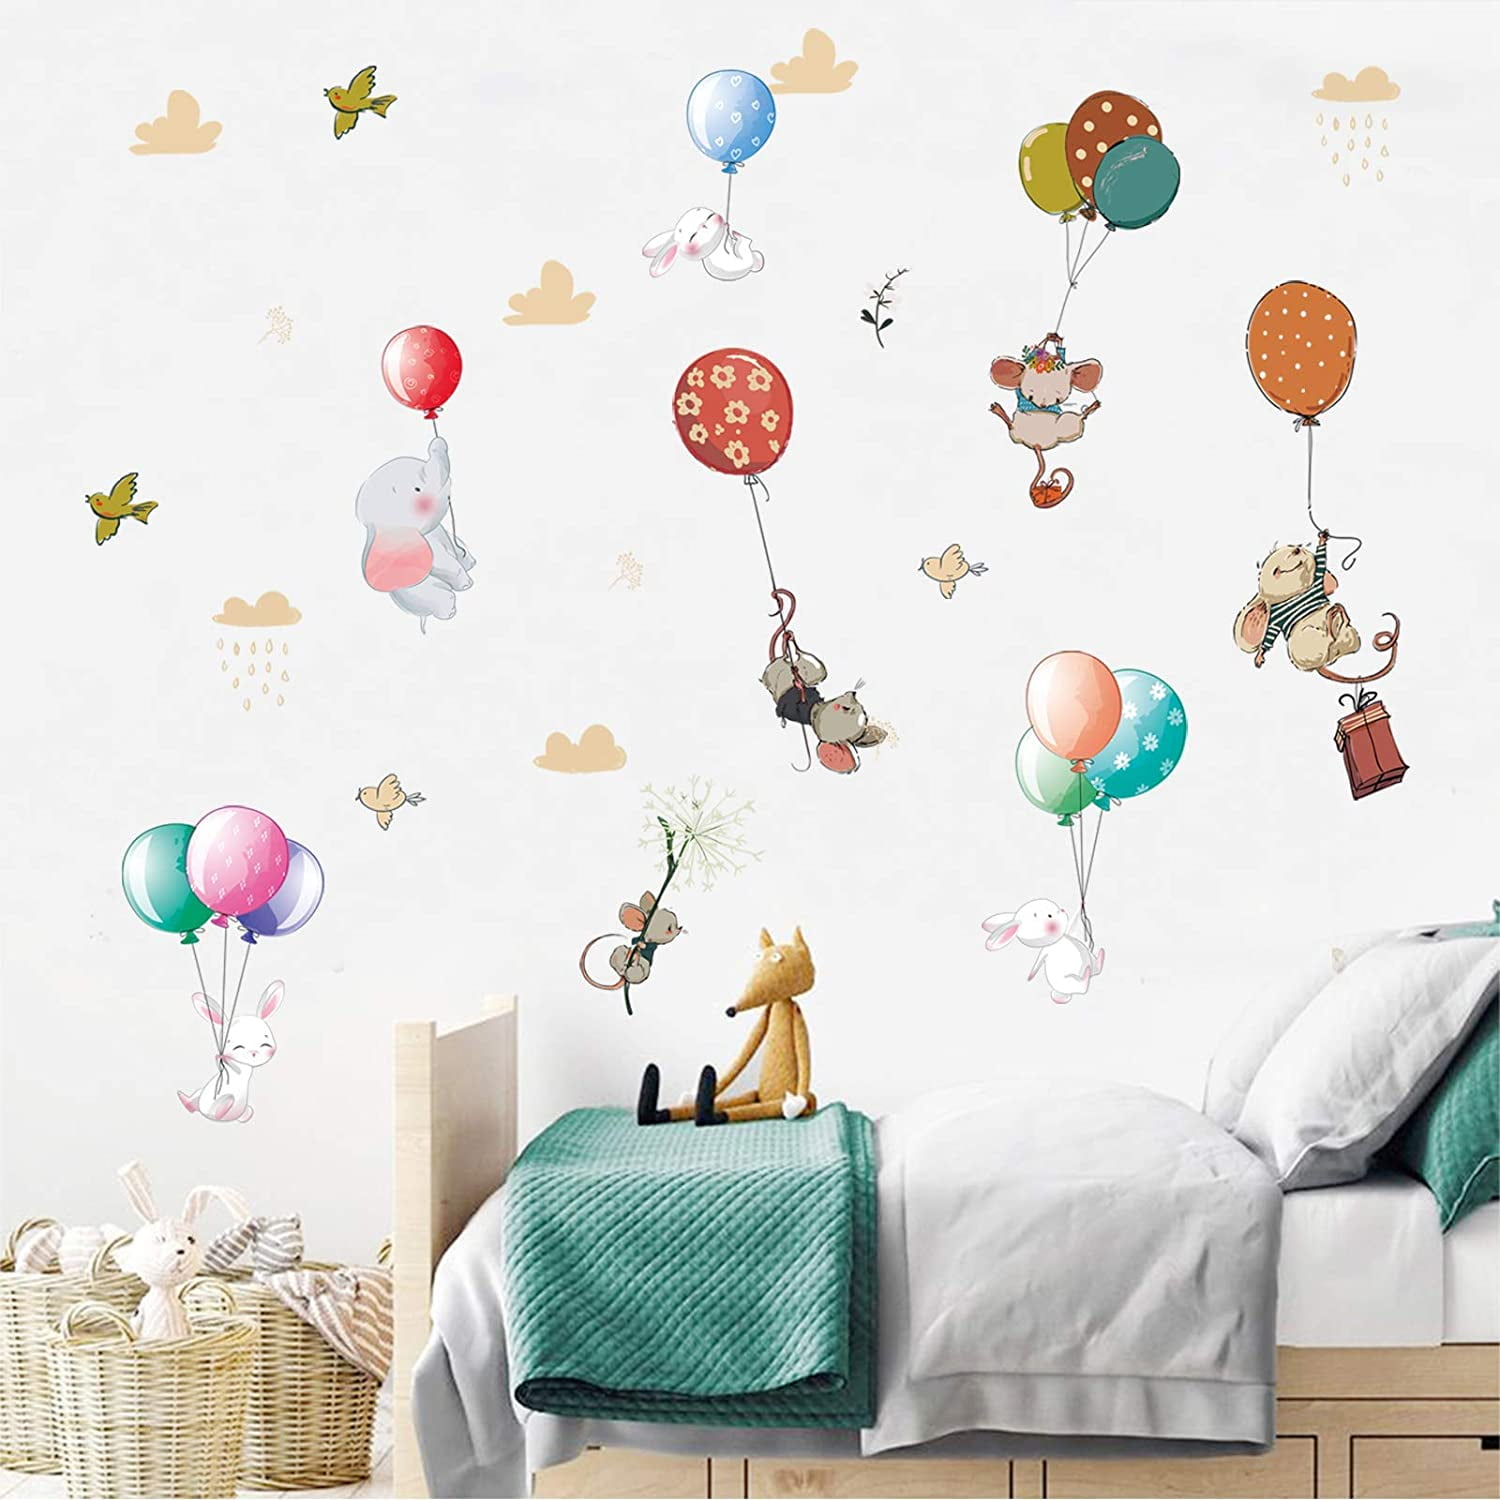 Cute Lovely Home Decor Wall Sticker Removable Living Room Bedroom Decoration